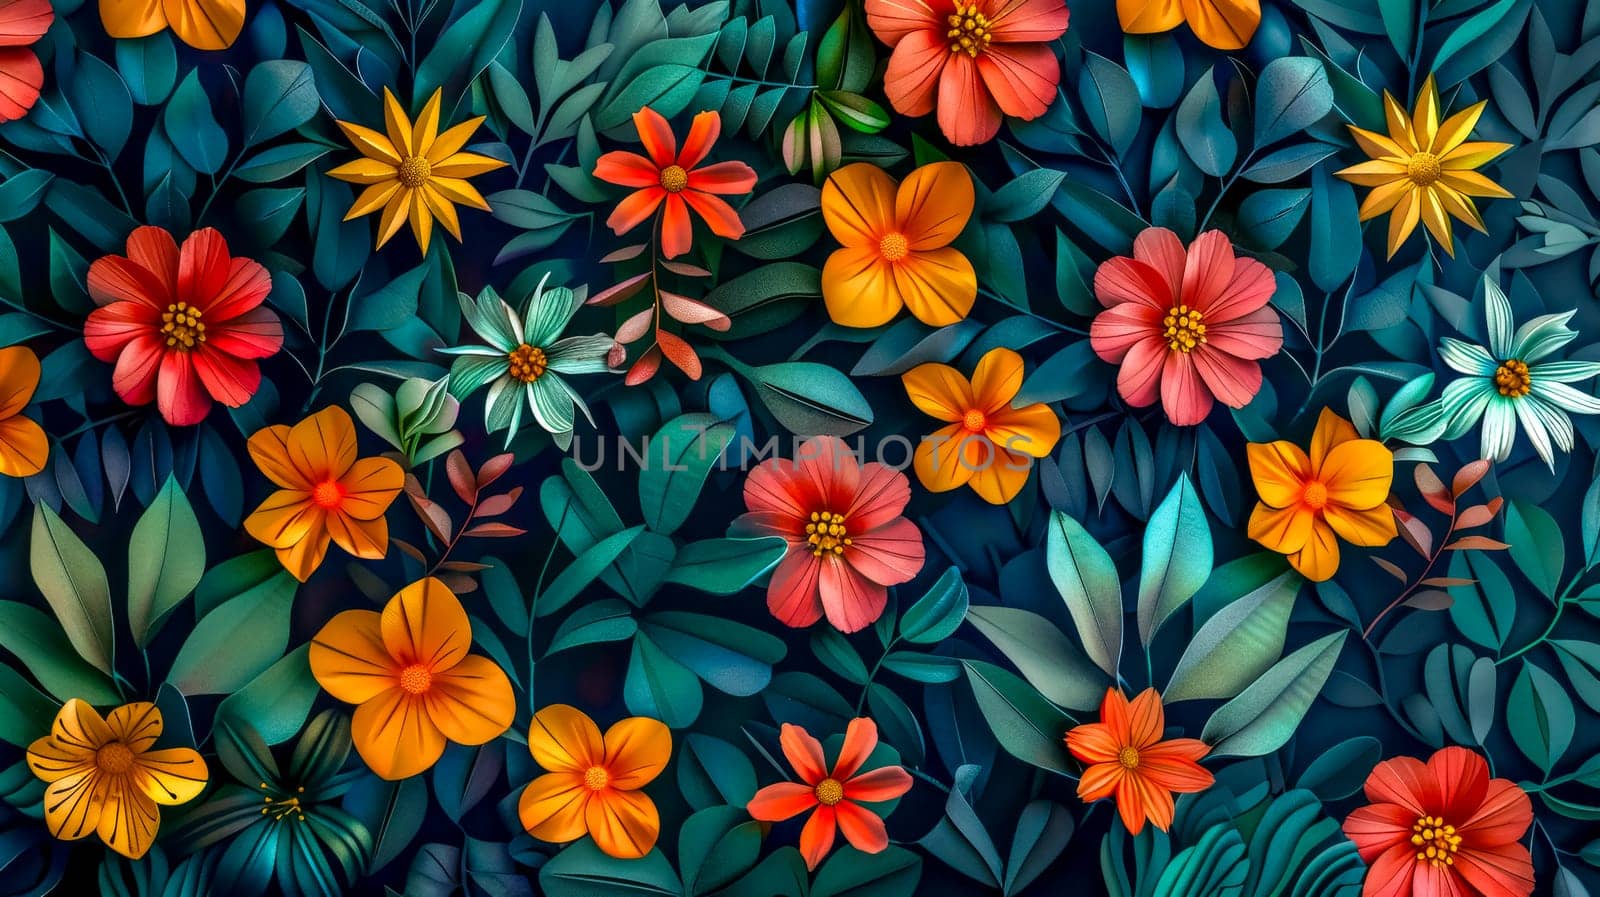 Detailed texture of colorful handcrafted paper flowers and leaves in a dense floral pattern